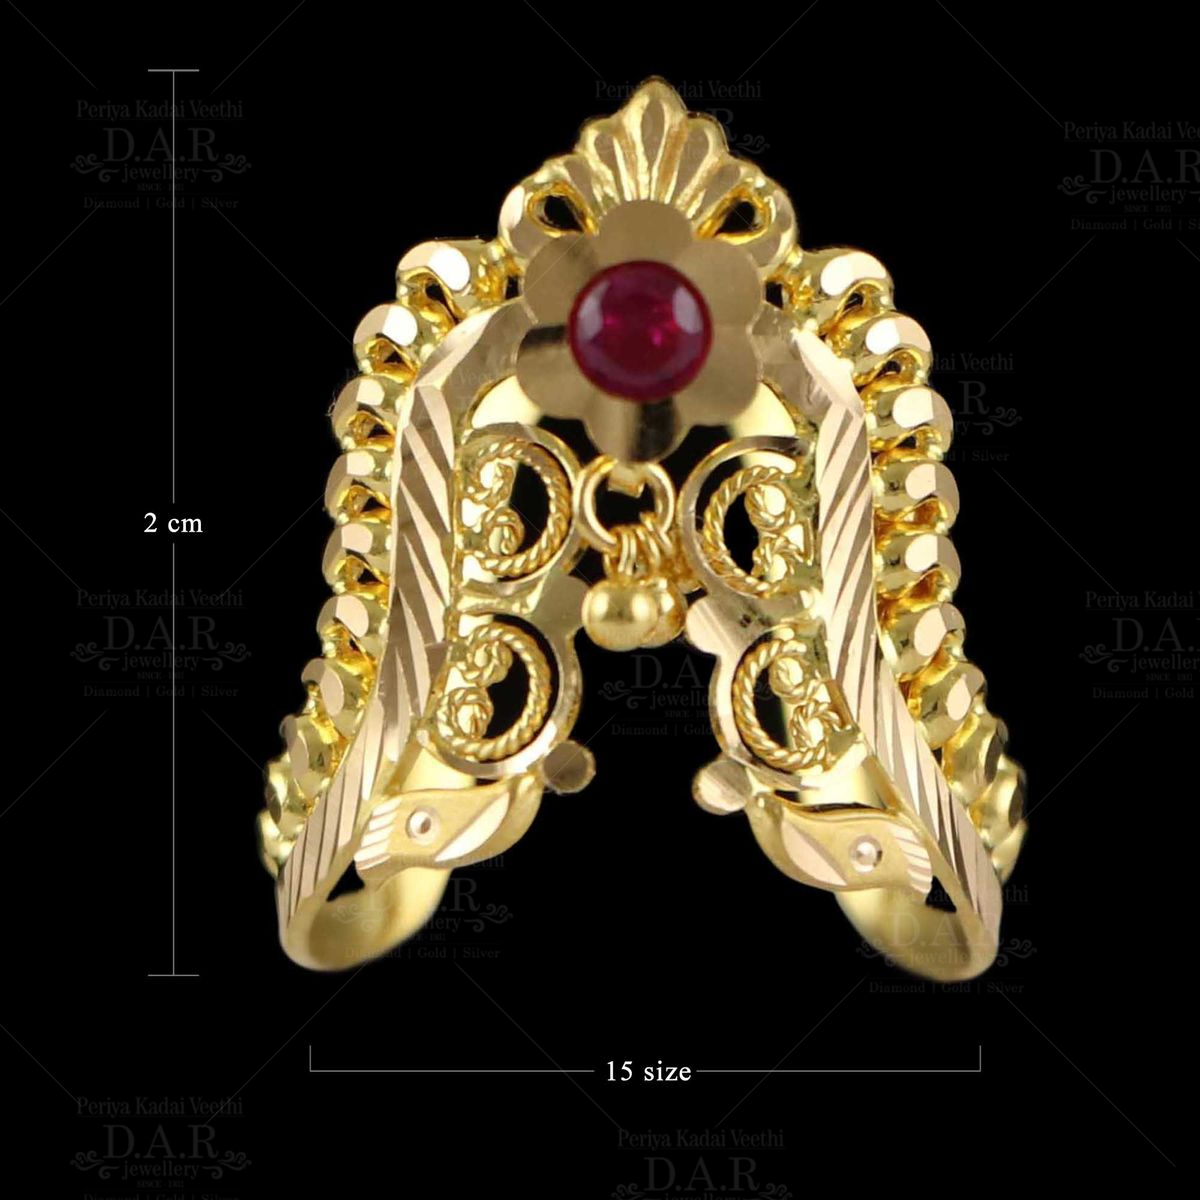 South Indian Style Ring/Band made of Gold and Diamonds